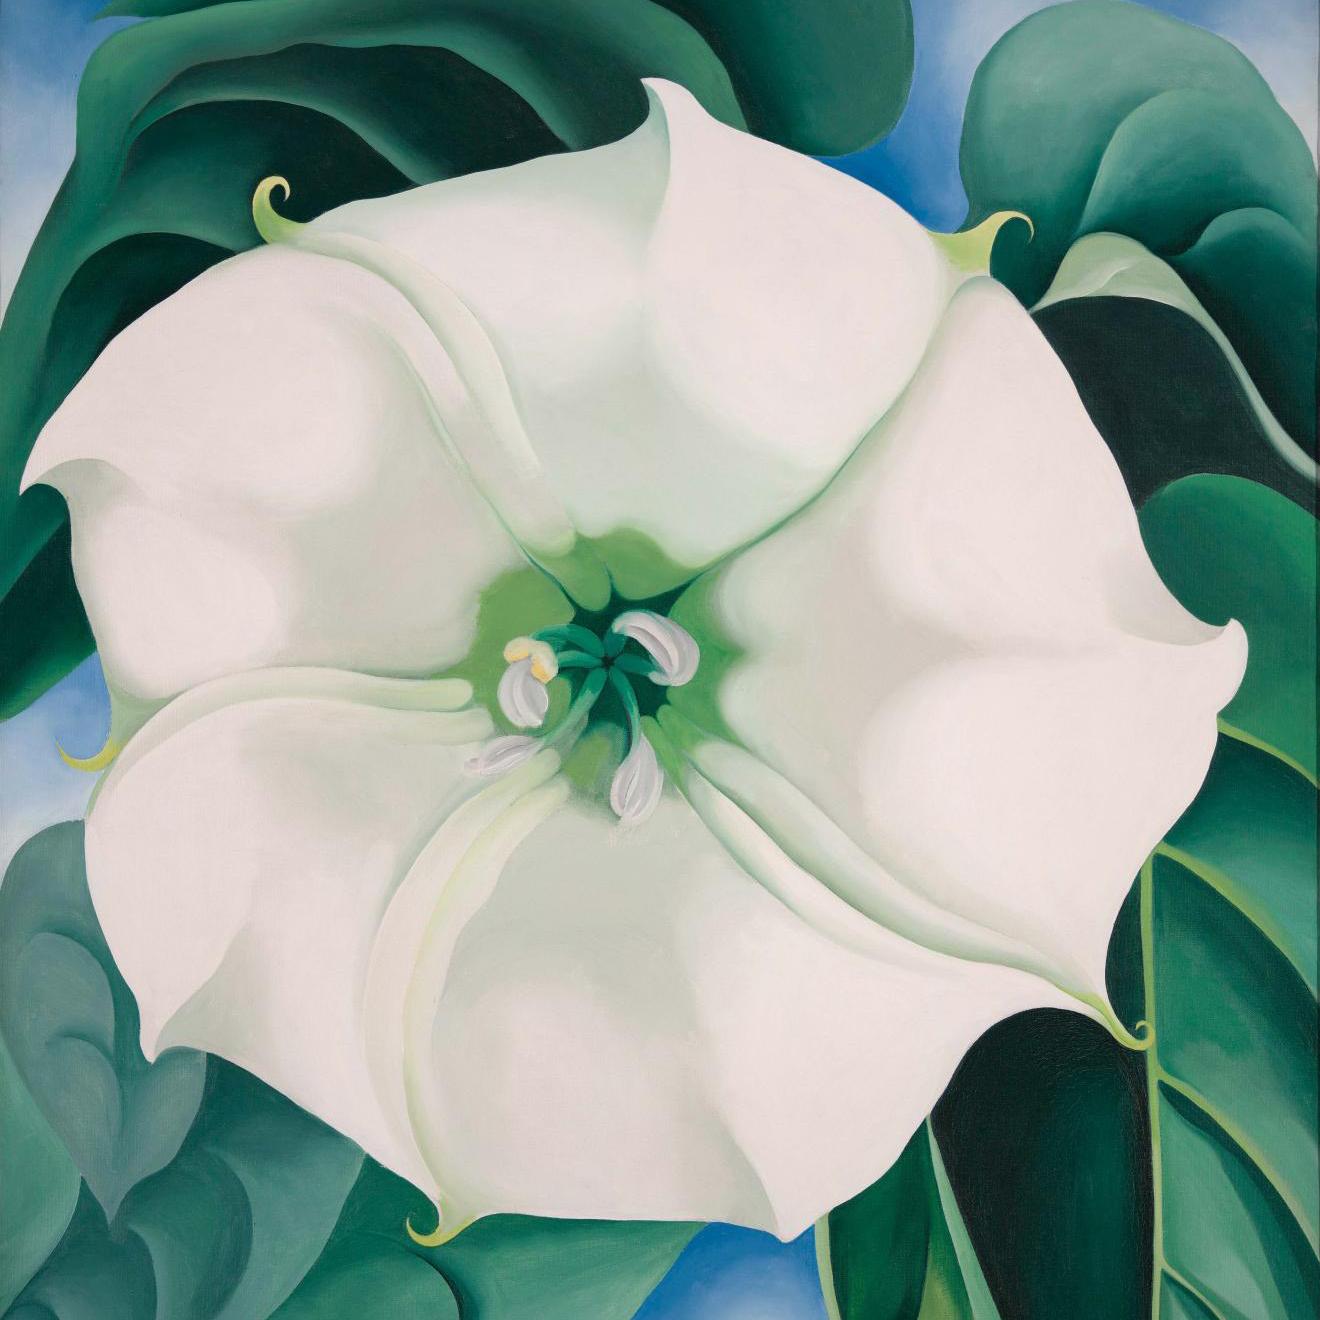 Earth and Peace: Georgia O'Keeffe in Paris - Exhibitions